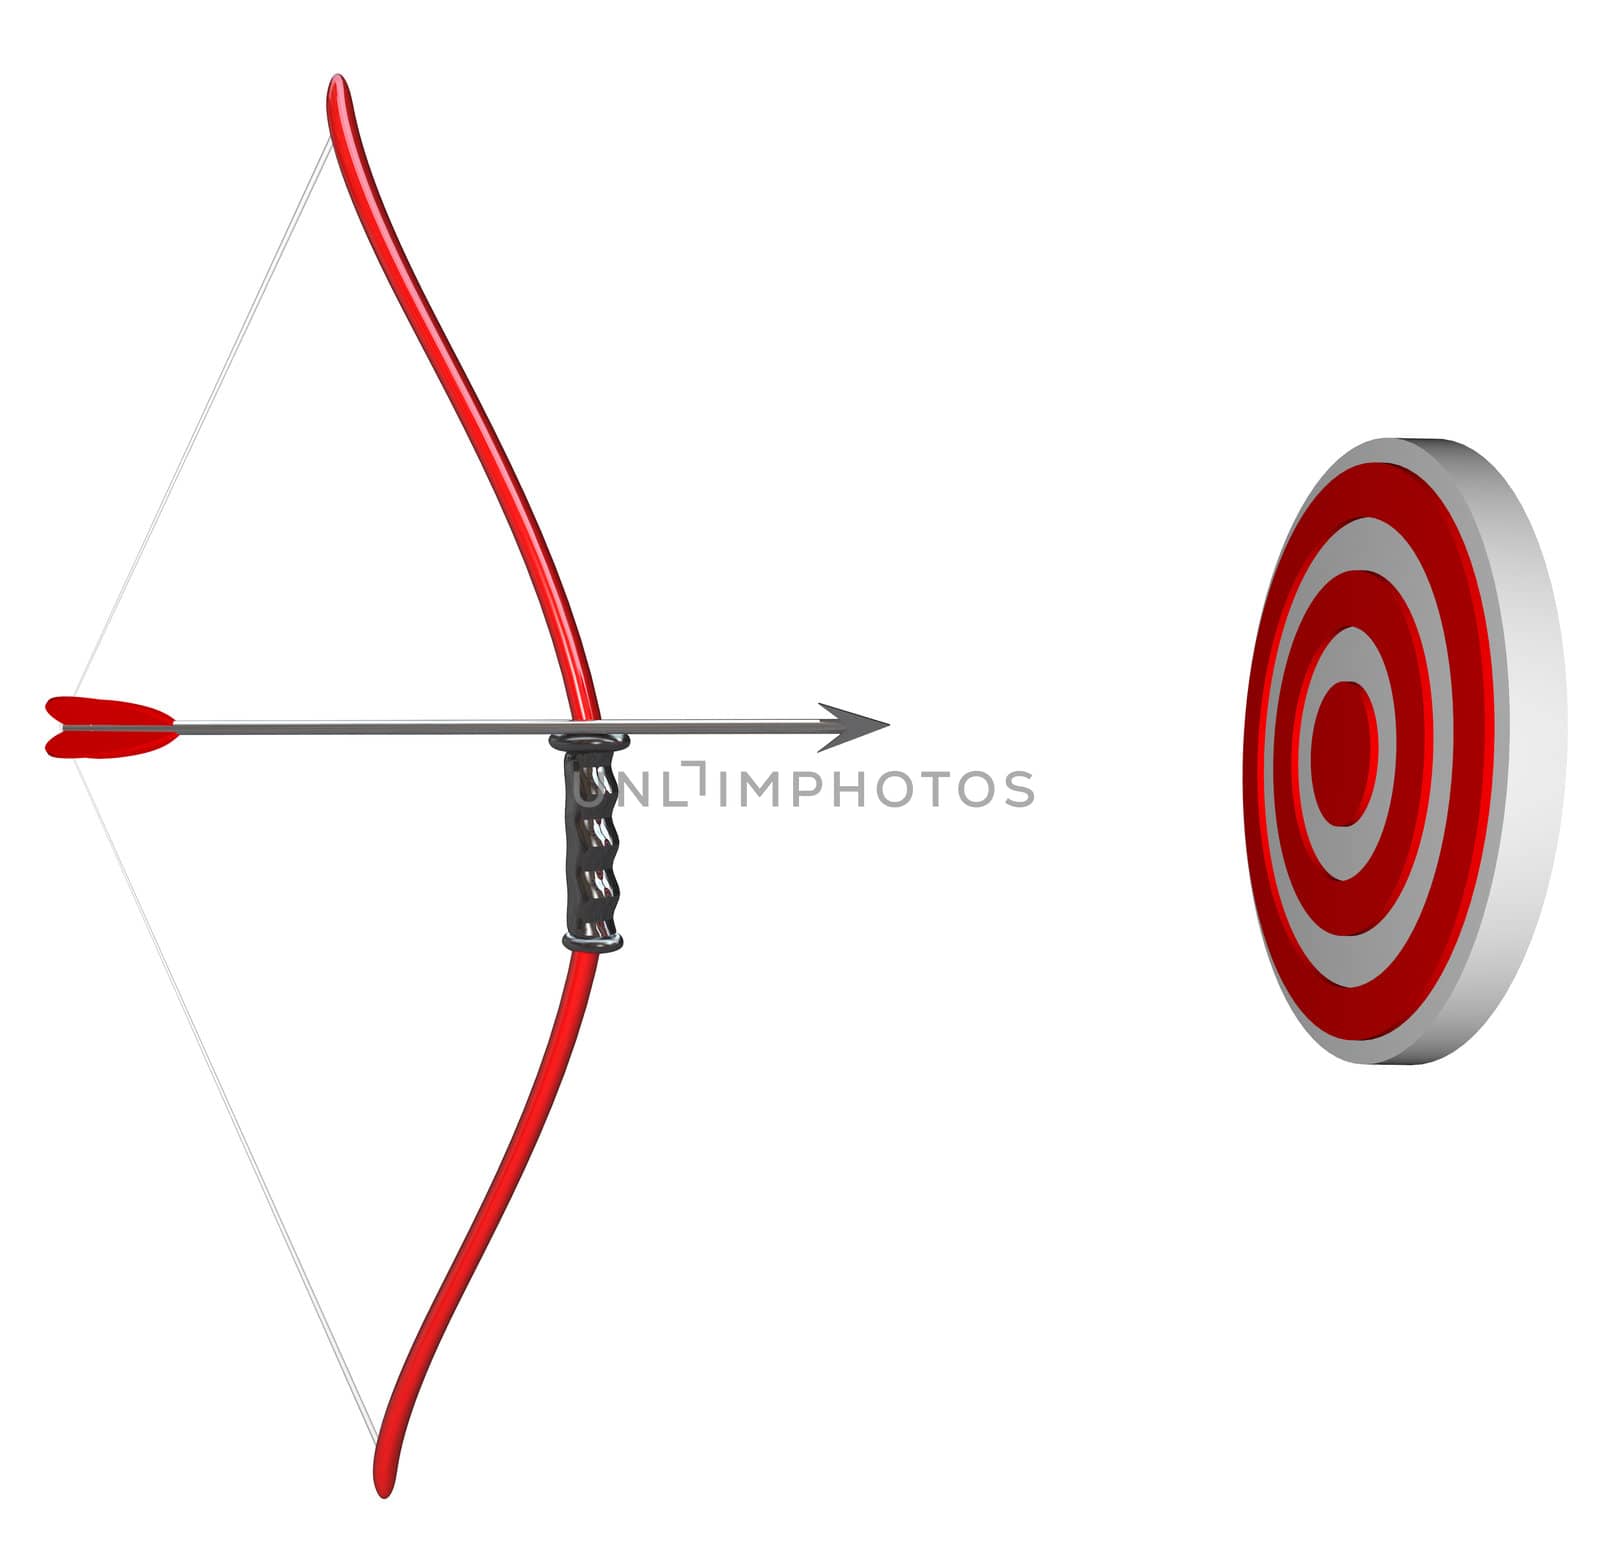 A bow and arrow is held aiming at a target bulls-eye, representing concentration as you focus on succeeding in hitting your goal